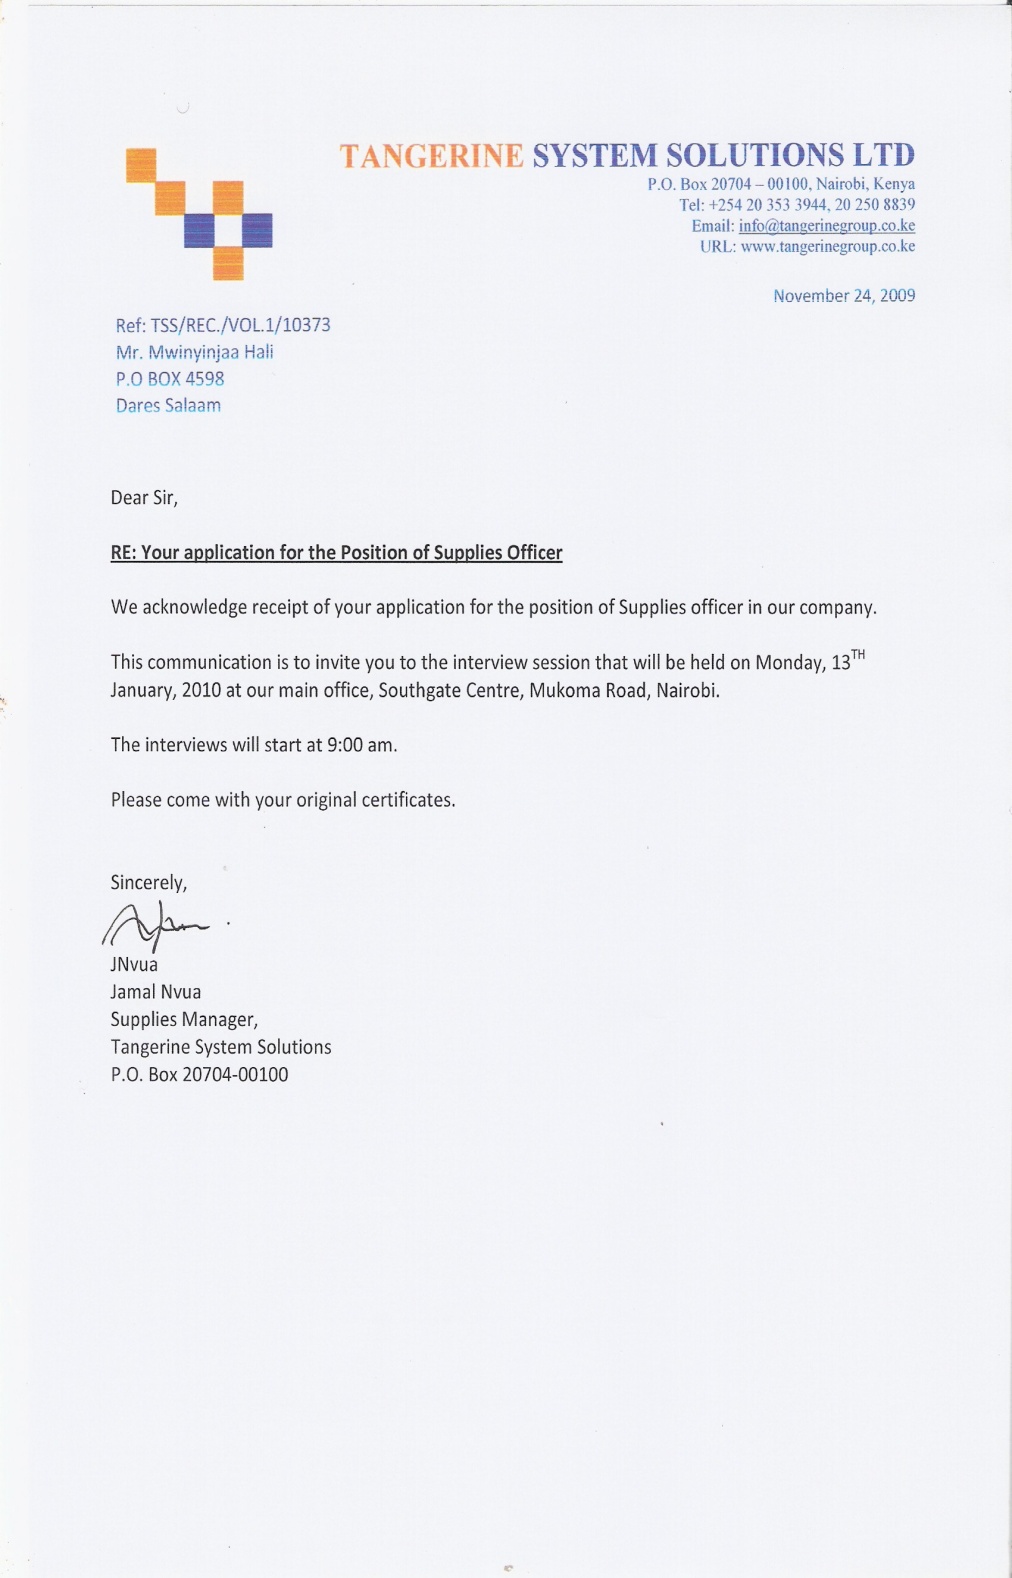 Official Business Letter Template from orelt.col.org